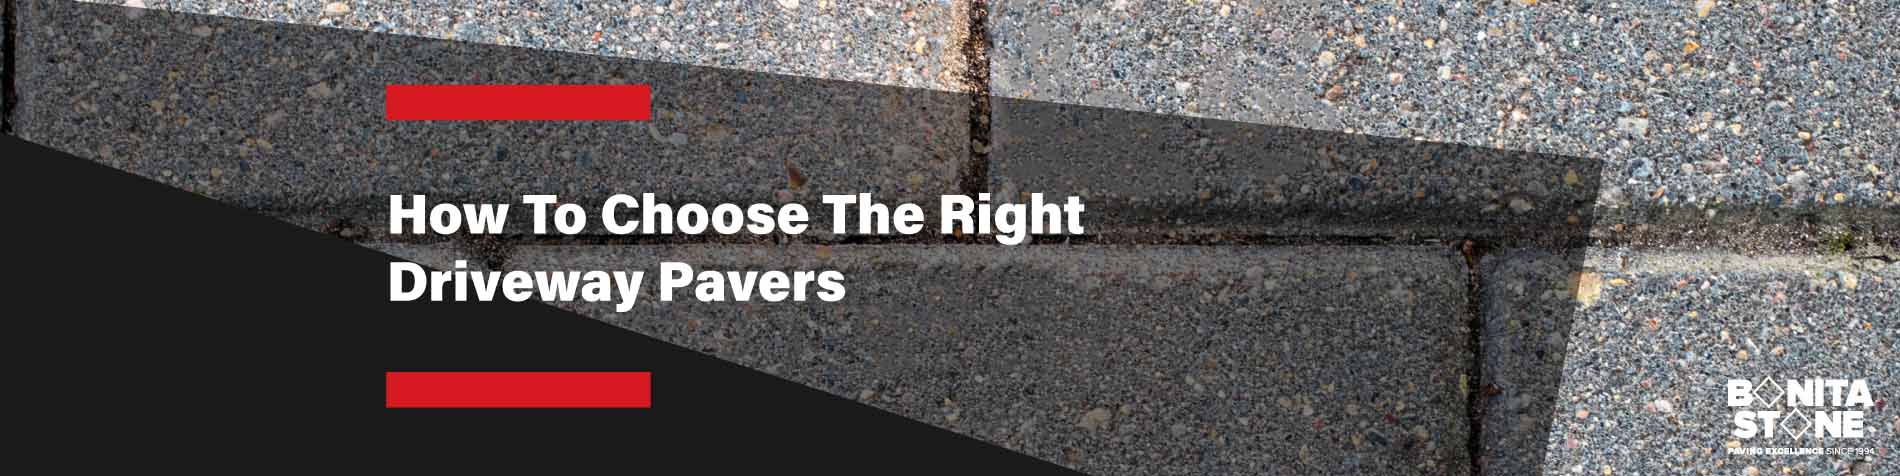 how-to-choose-the-right-driveway-pavers-banner